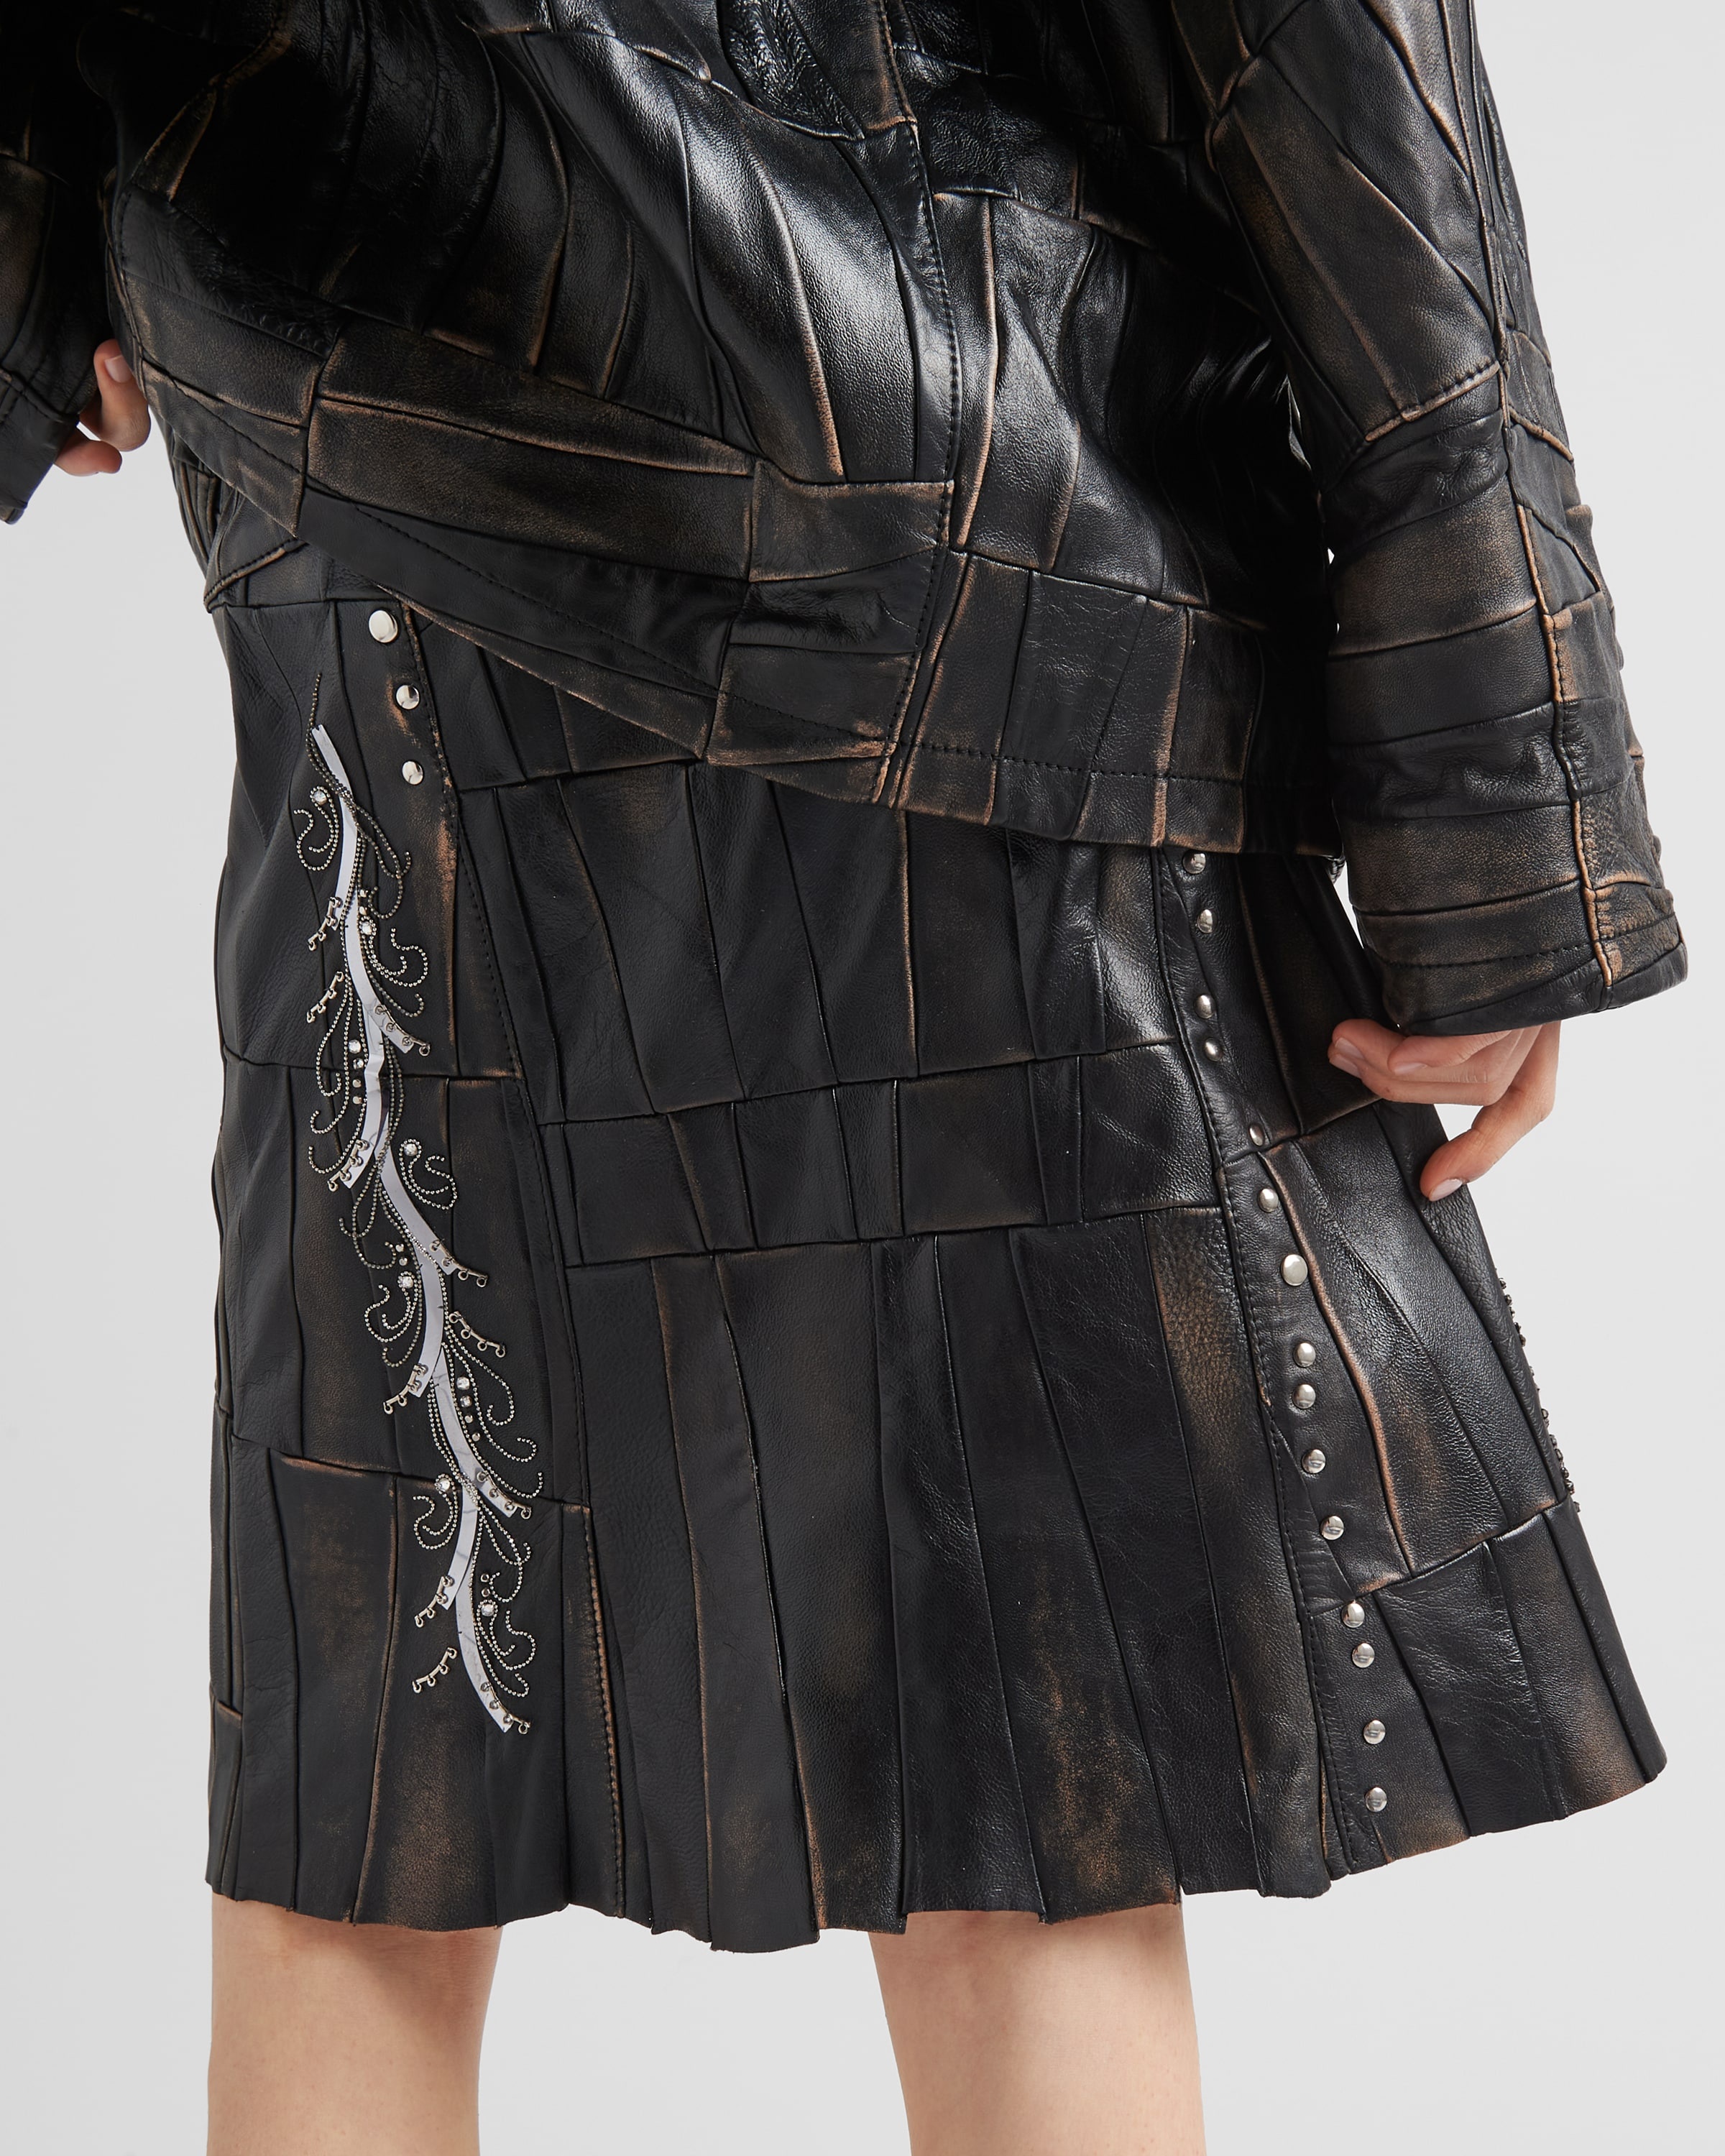 Nappa leather patchwork skirt - 4